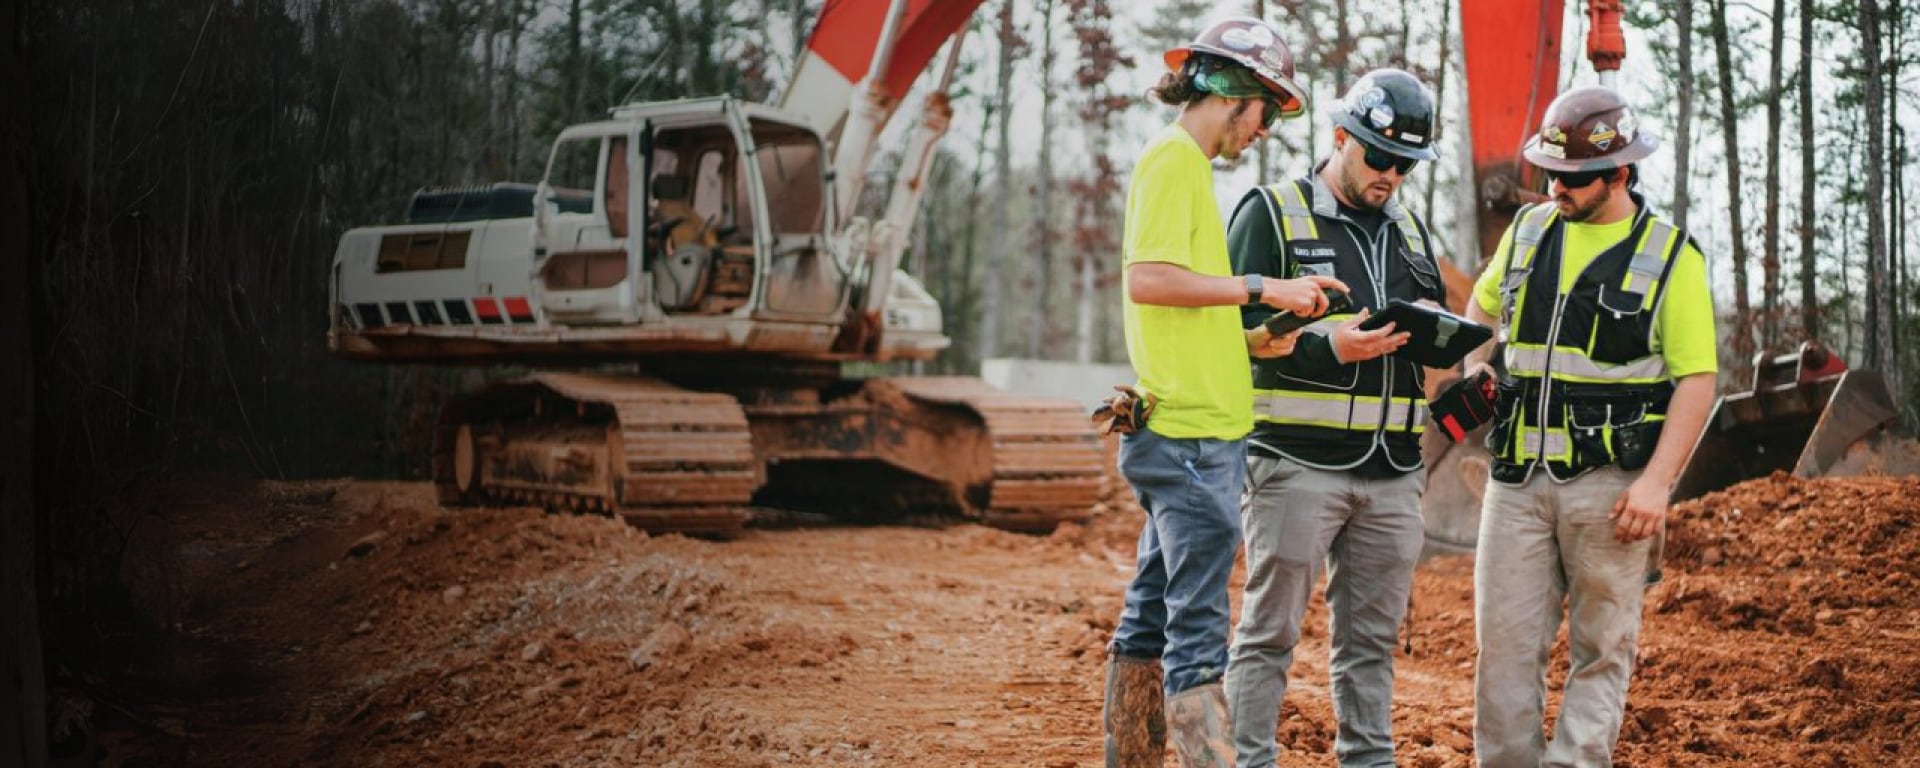  Construction workers on a jobsite with a tablet reviewing plans on Fieldwire